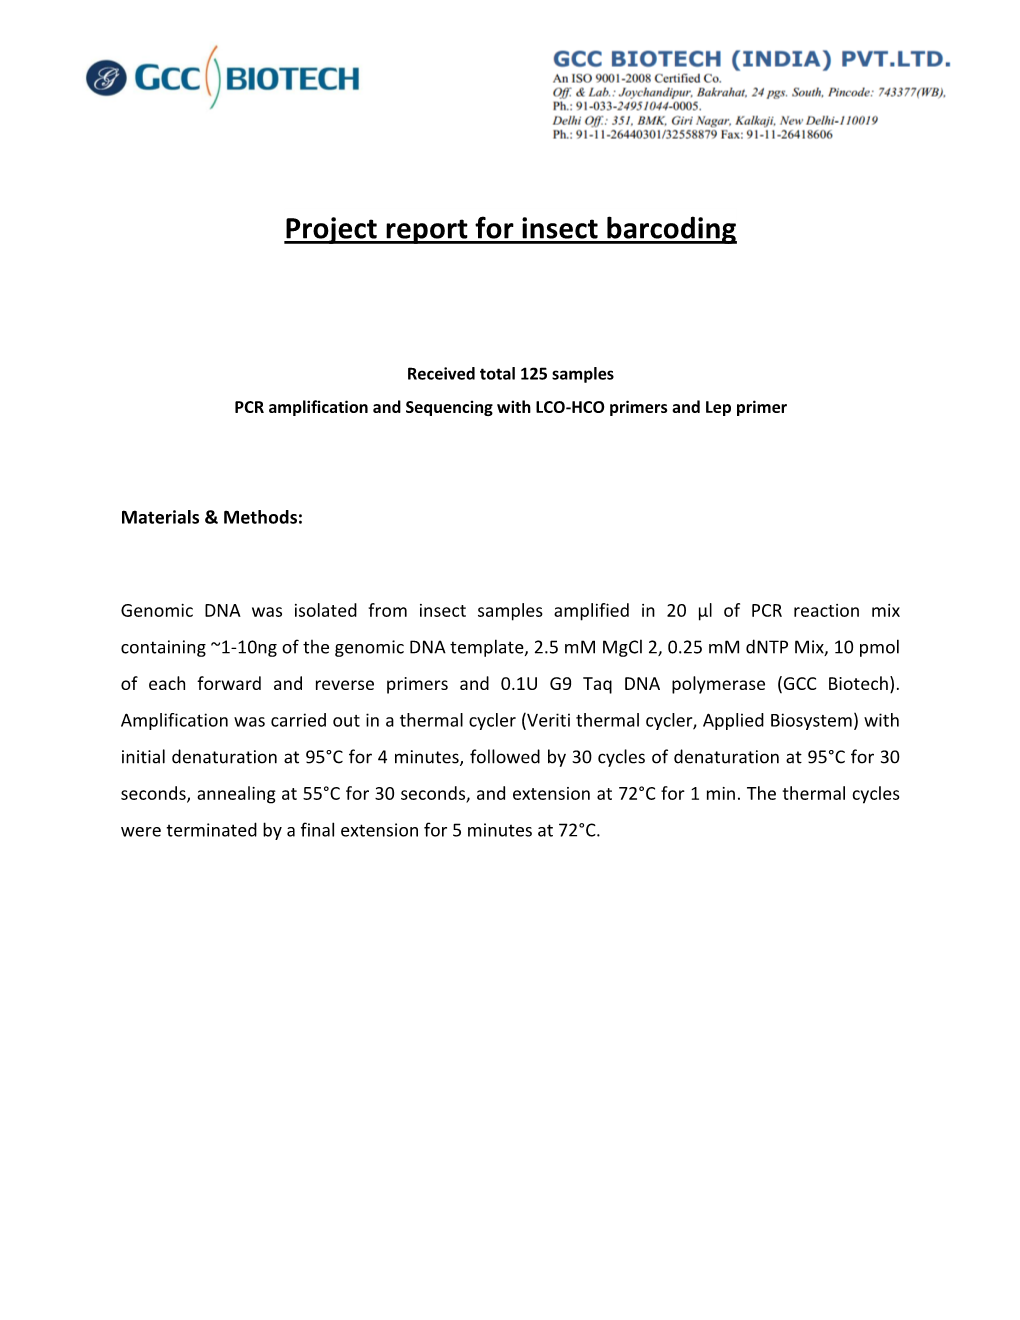 Project Report for Insect Barcoding